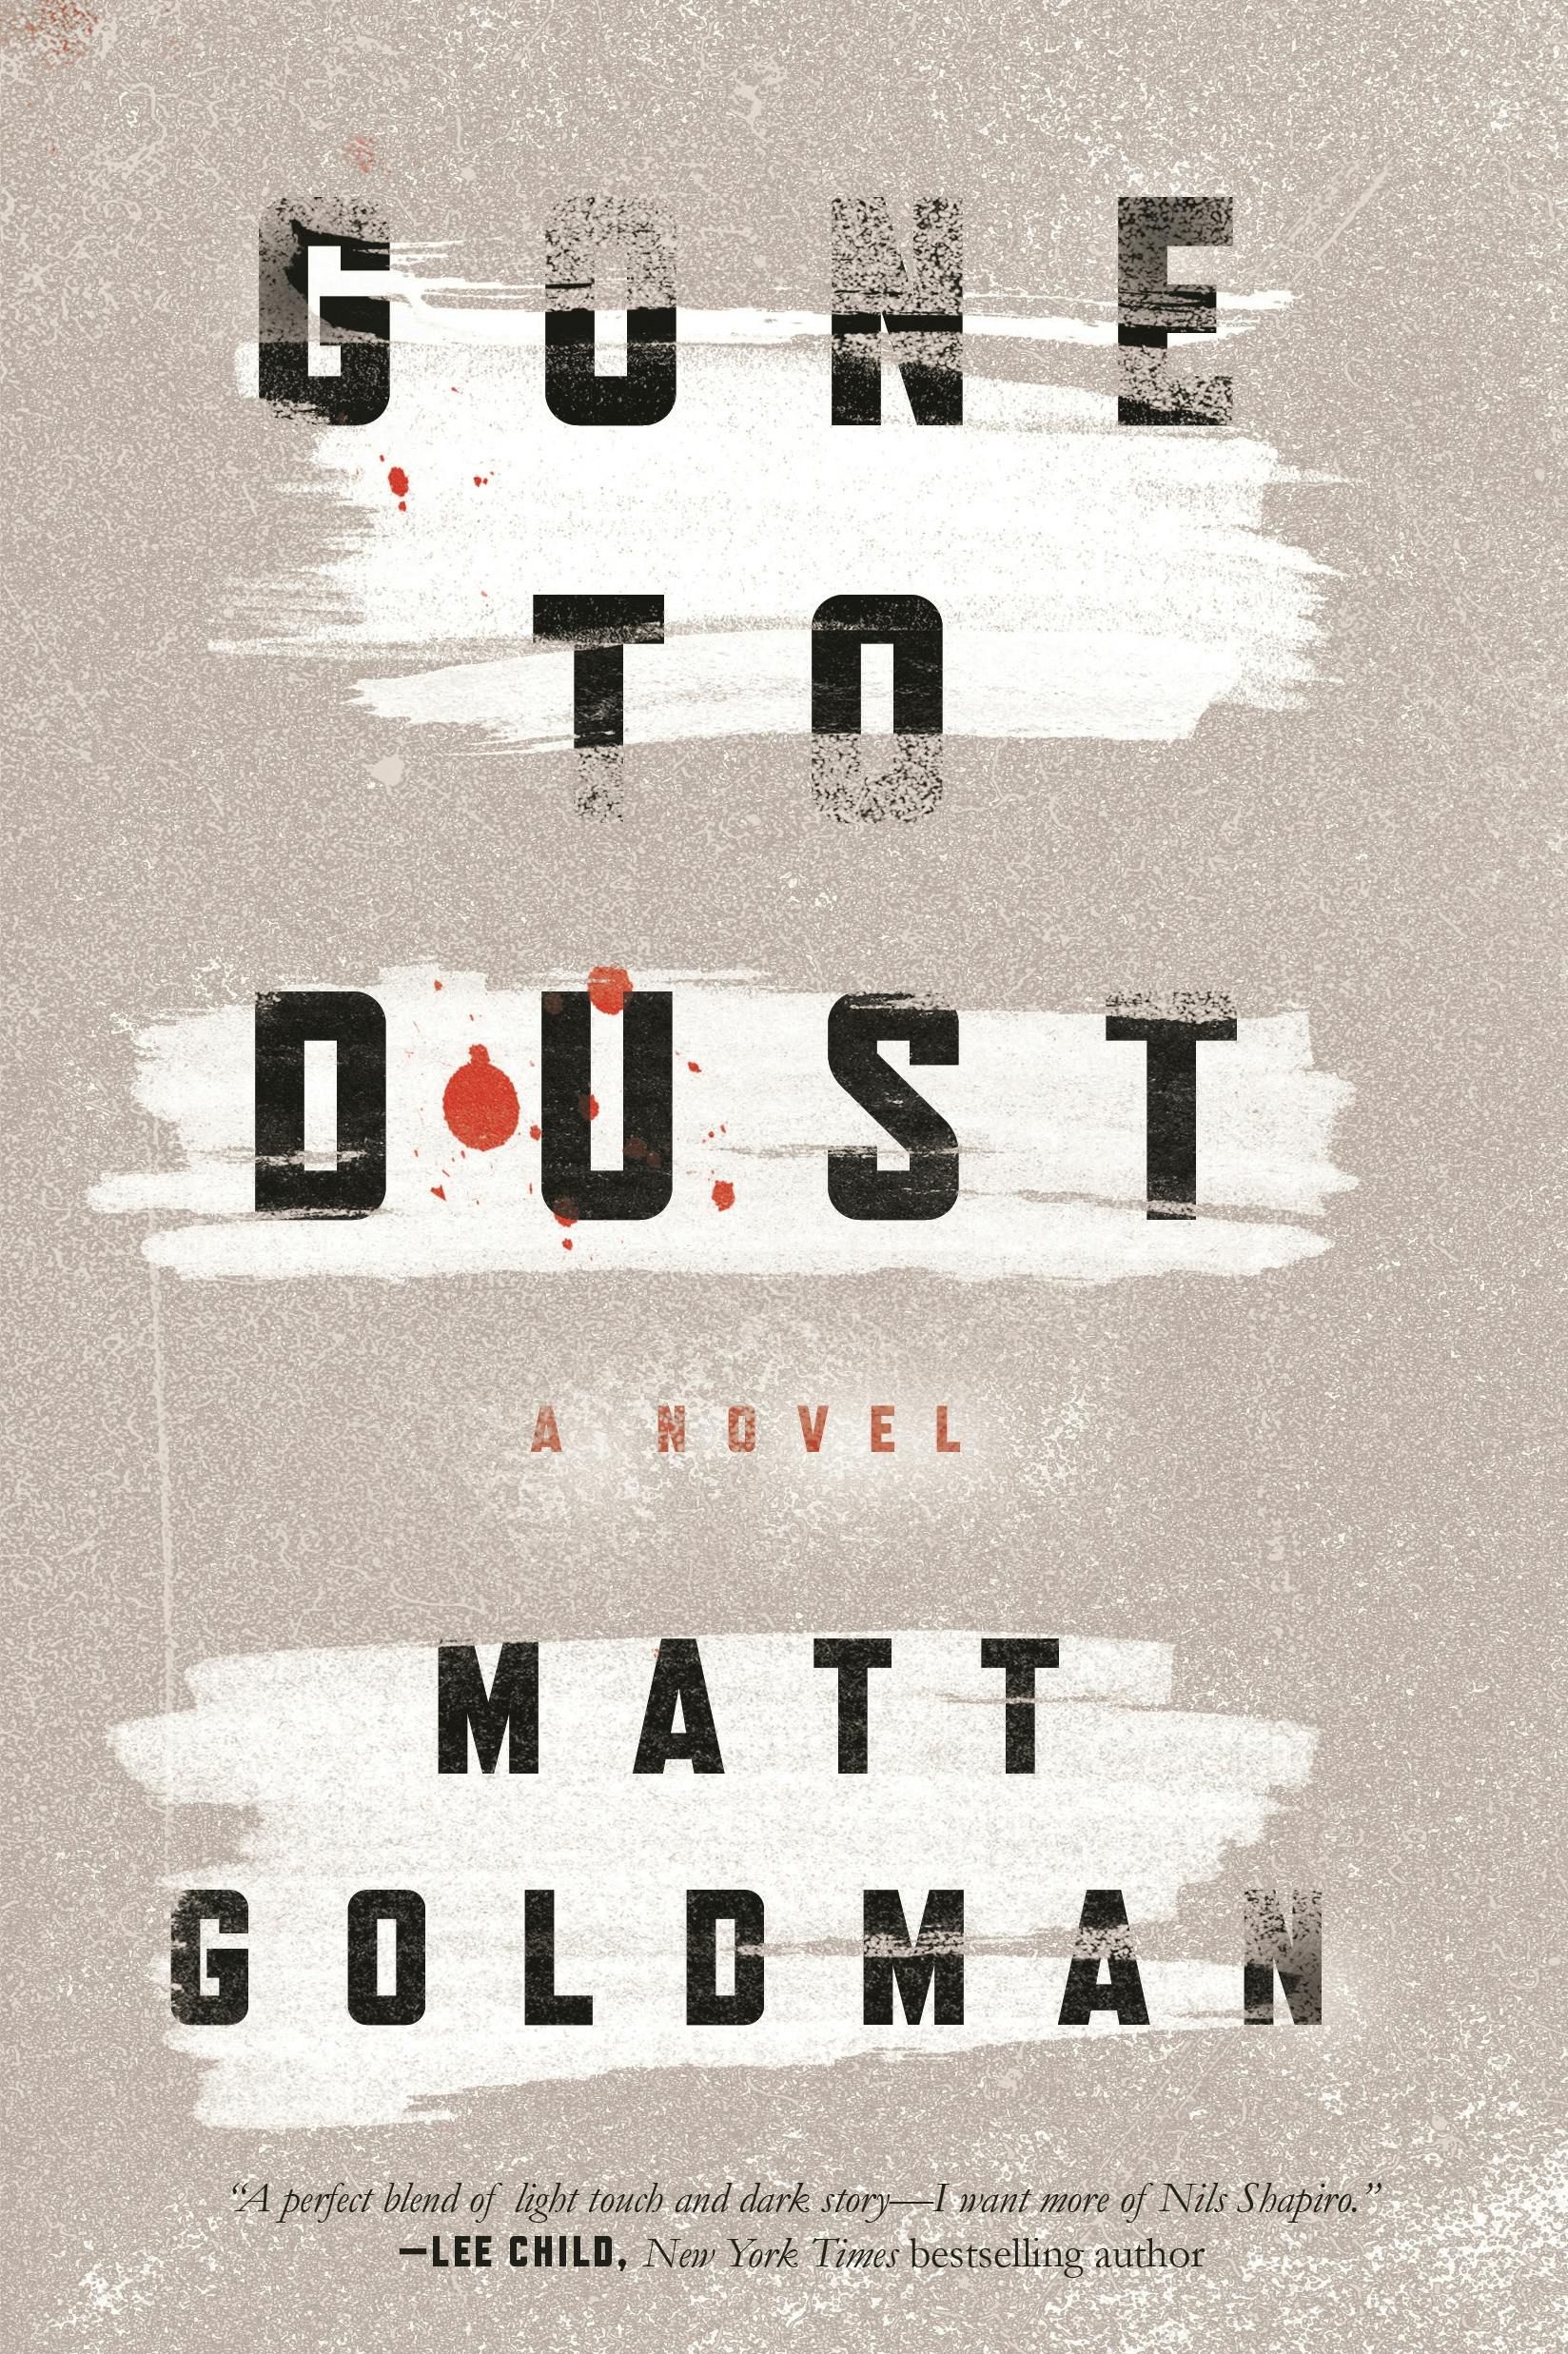 Cover for the book titled as: Gone to Dust